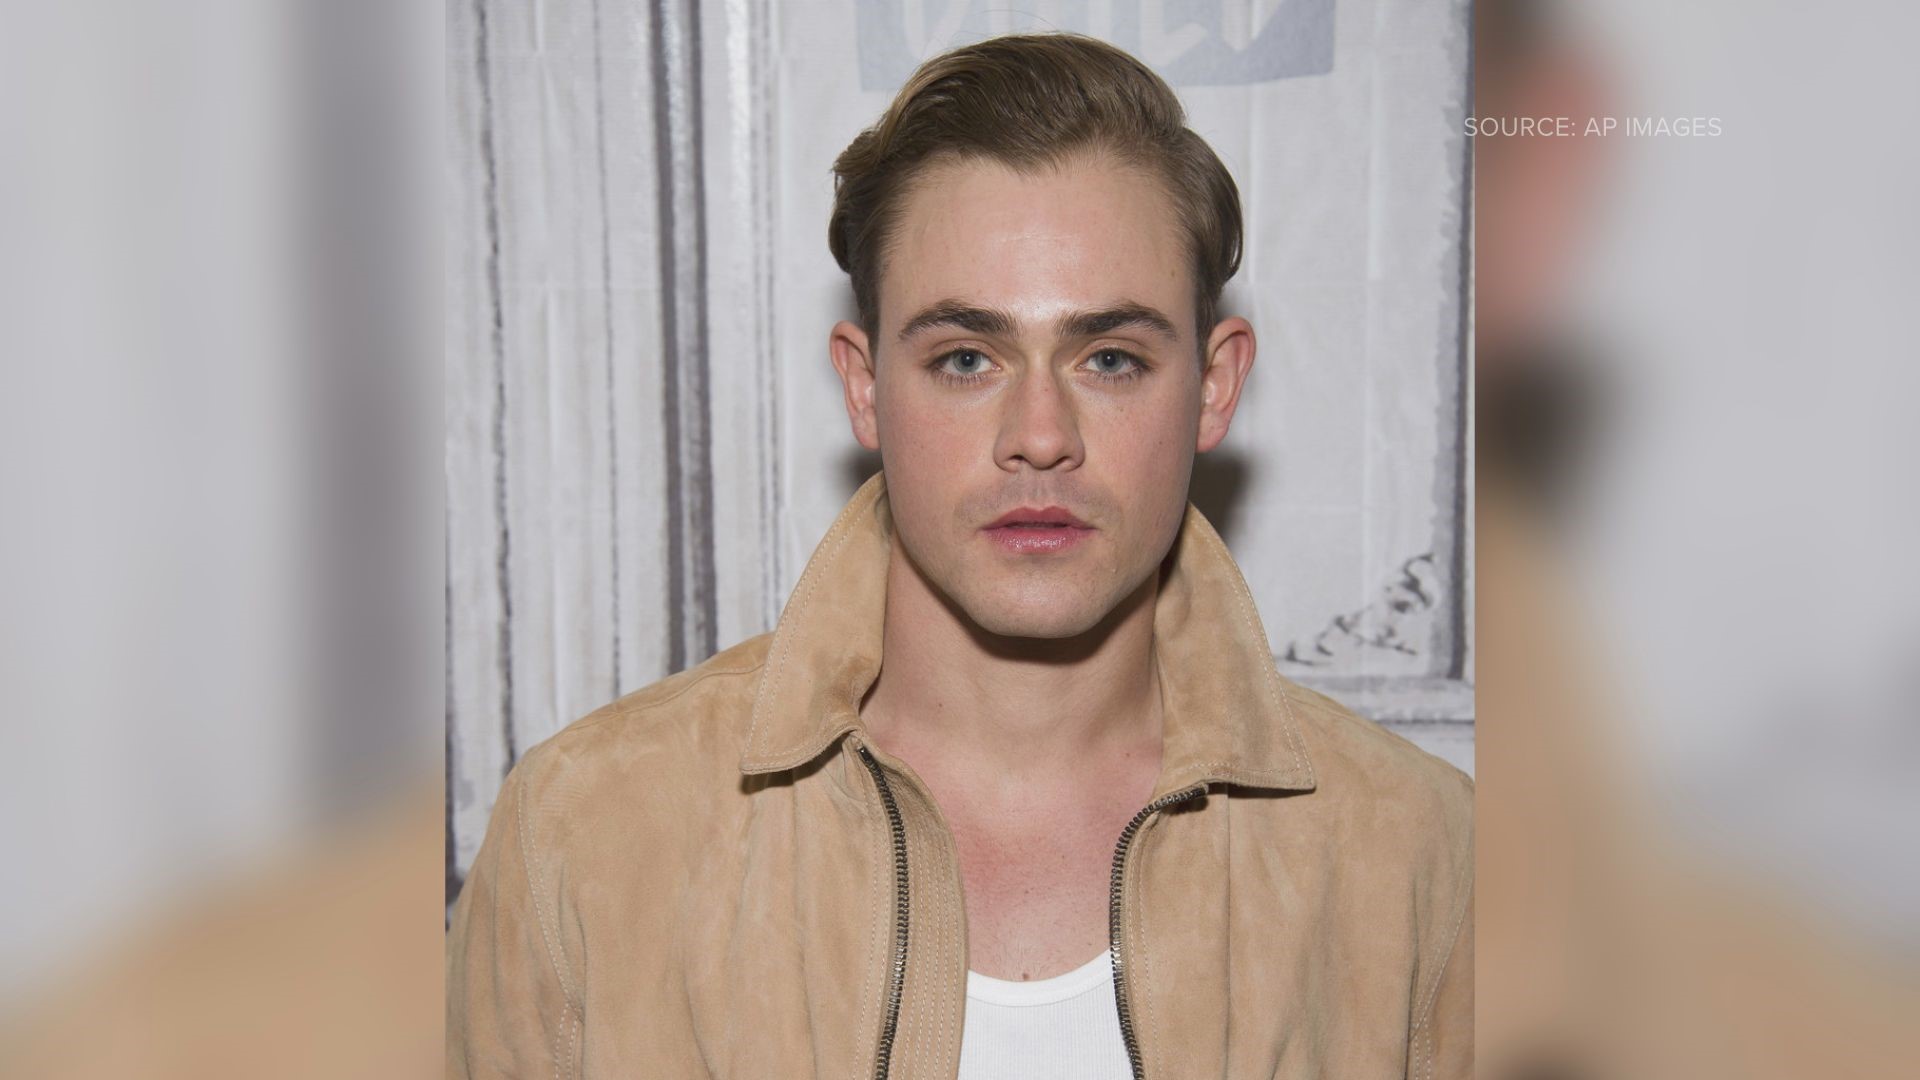 A Kentucky woman sent thousands to someone pretending to be Dacre Montgomery, known as ‘Billy’ from Stranger Things.